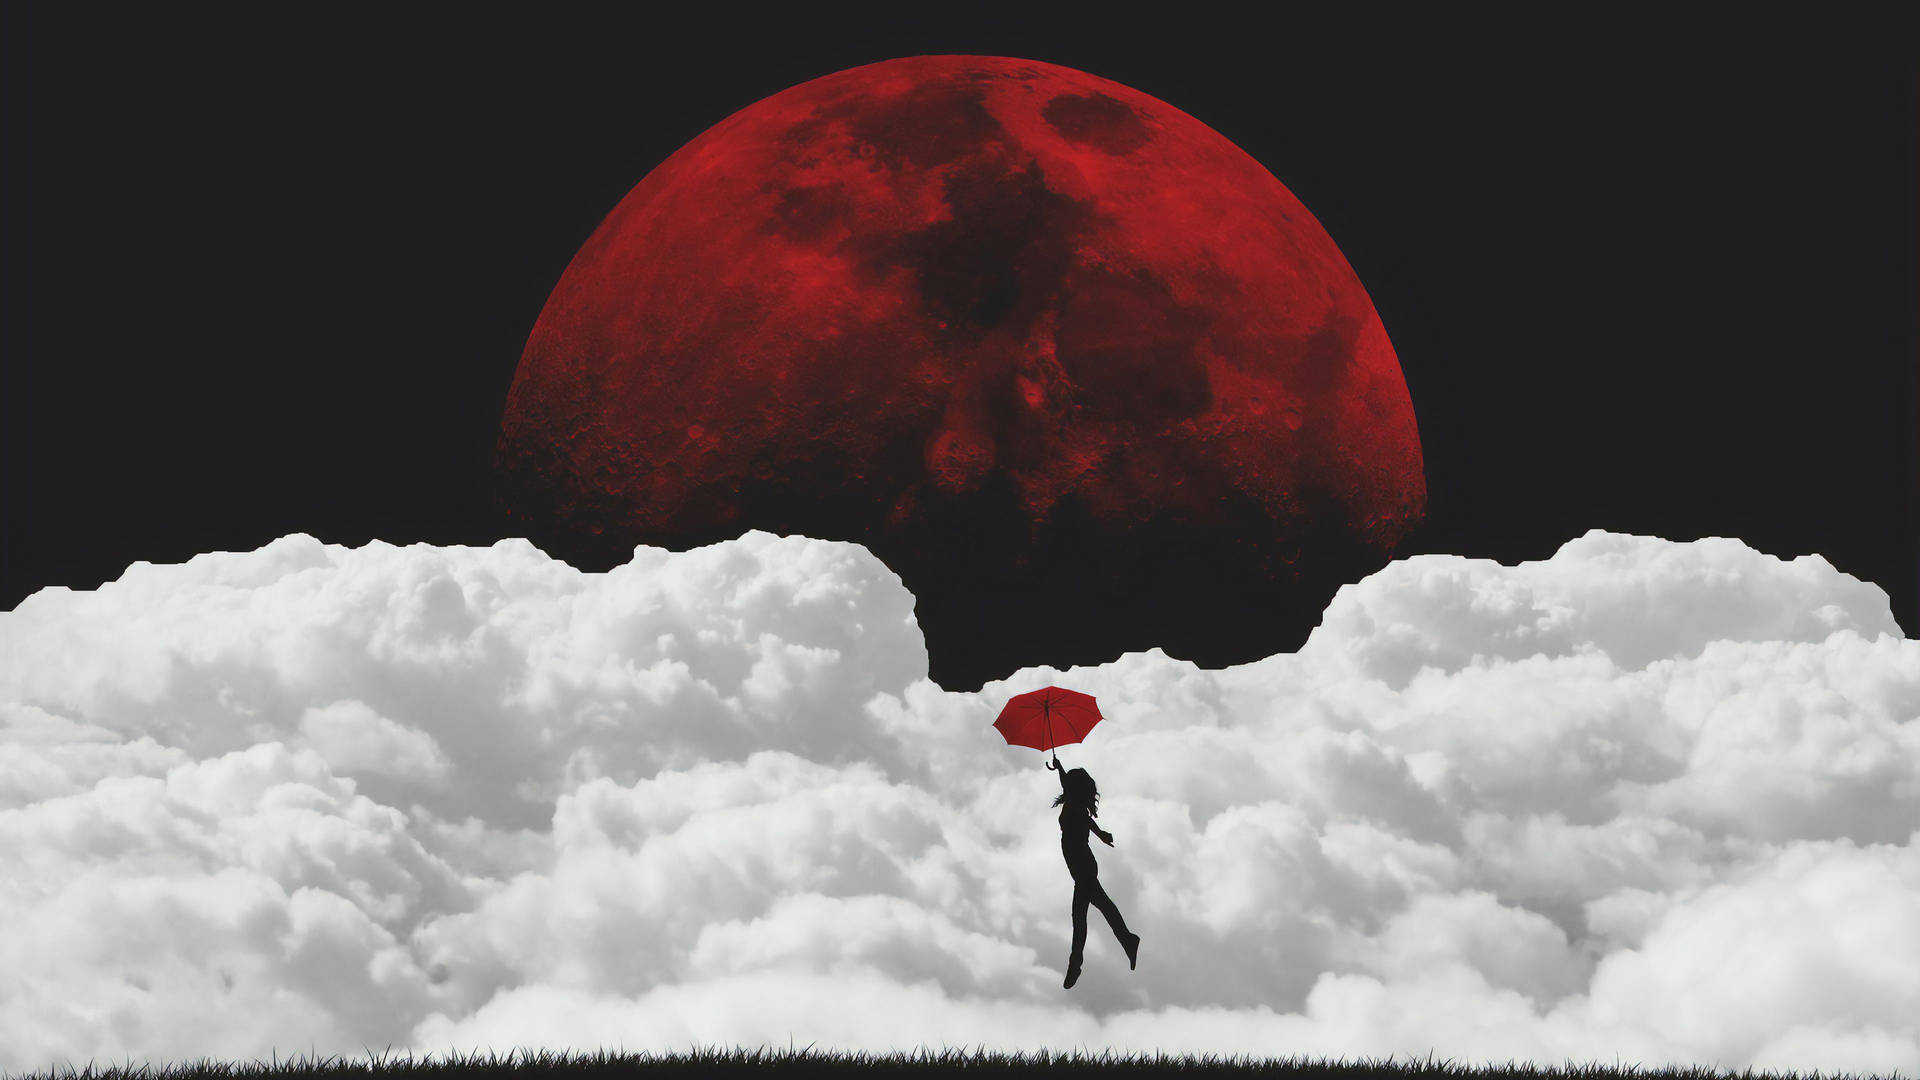 Moon 4k Red Aesthetic Girl With Red Umbrella Background